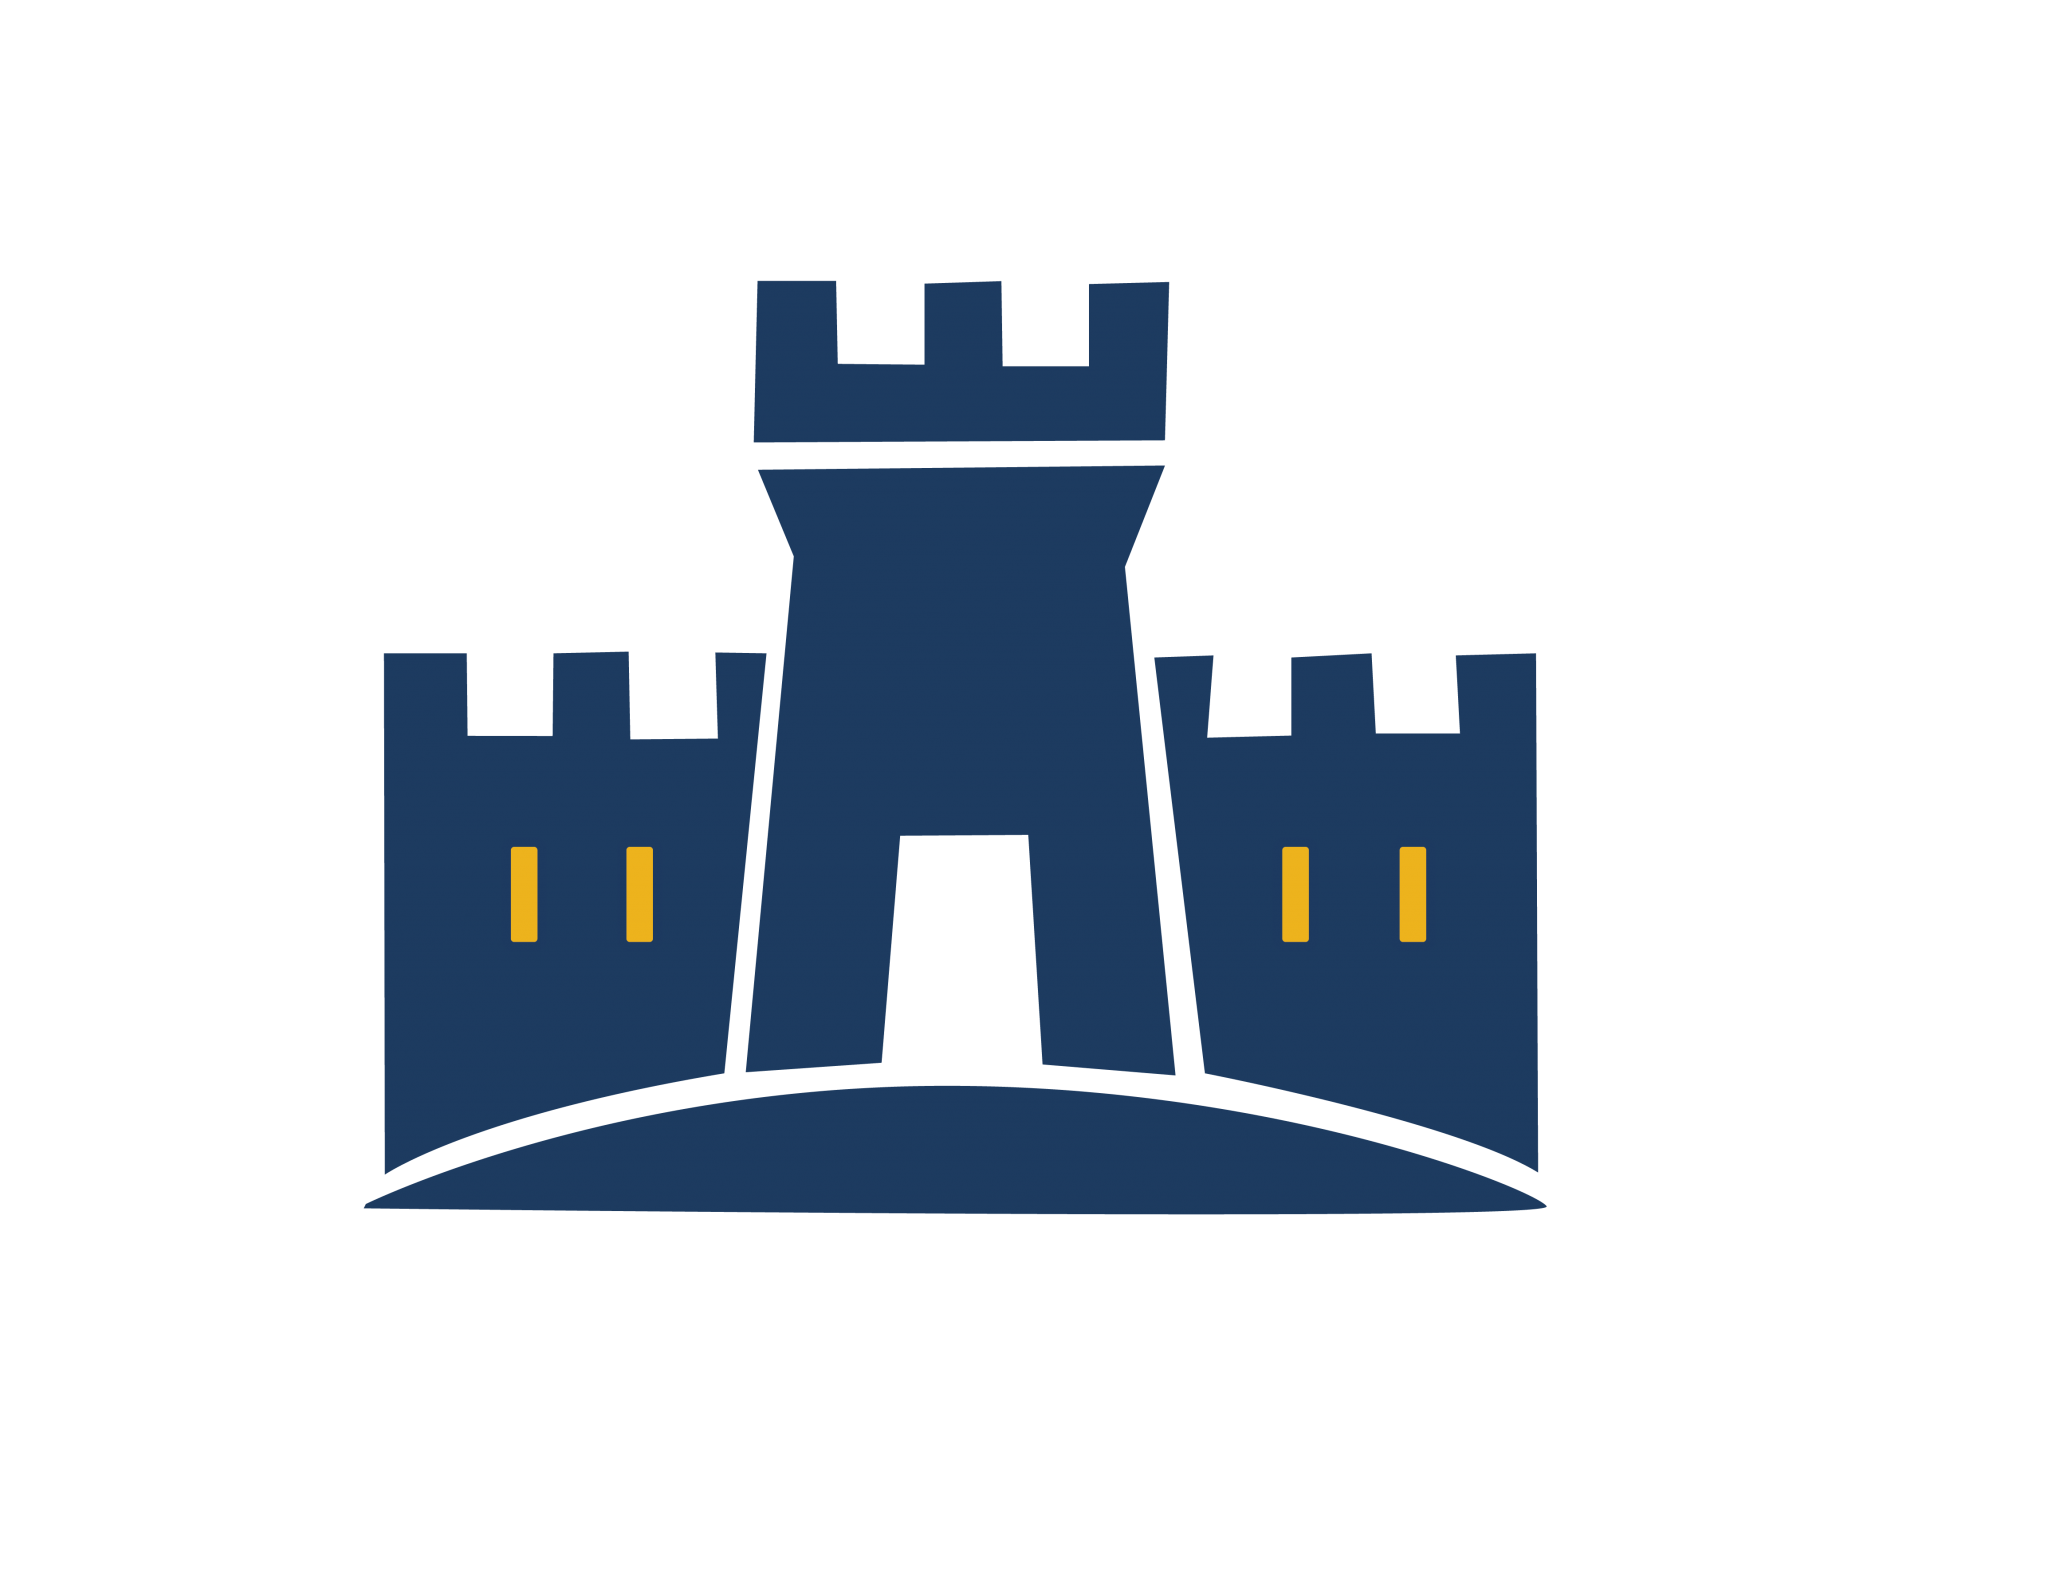 BISC castle icon